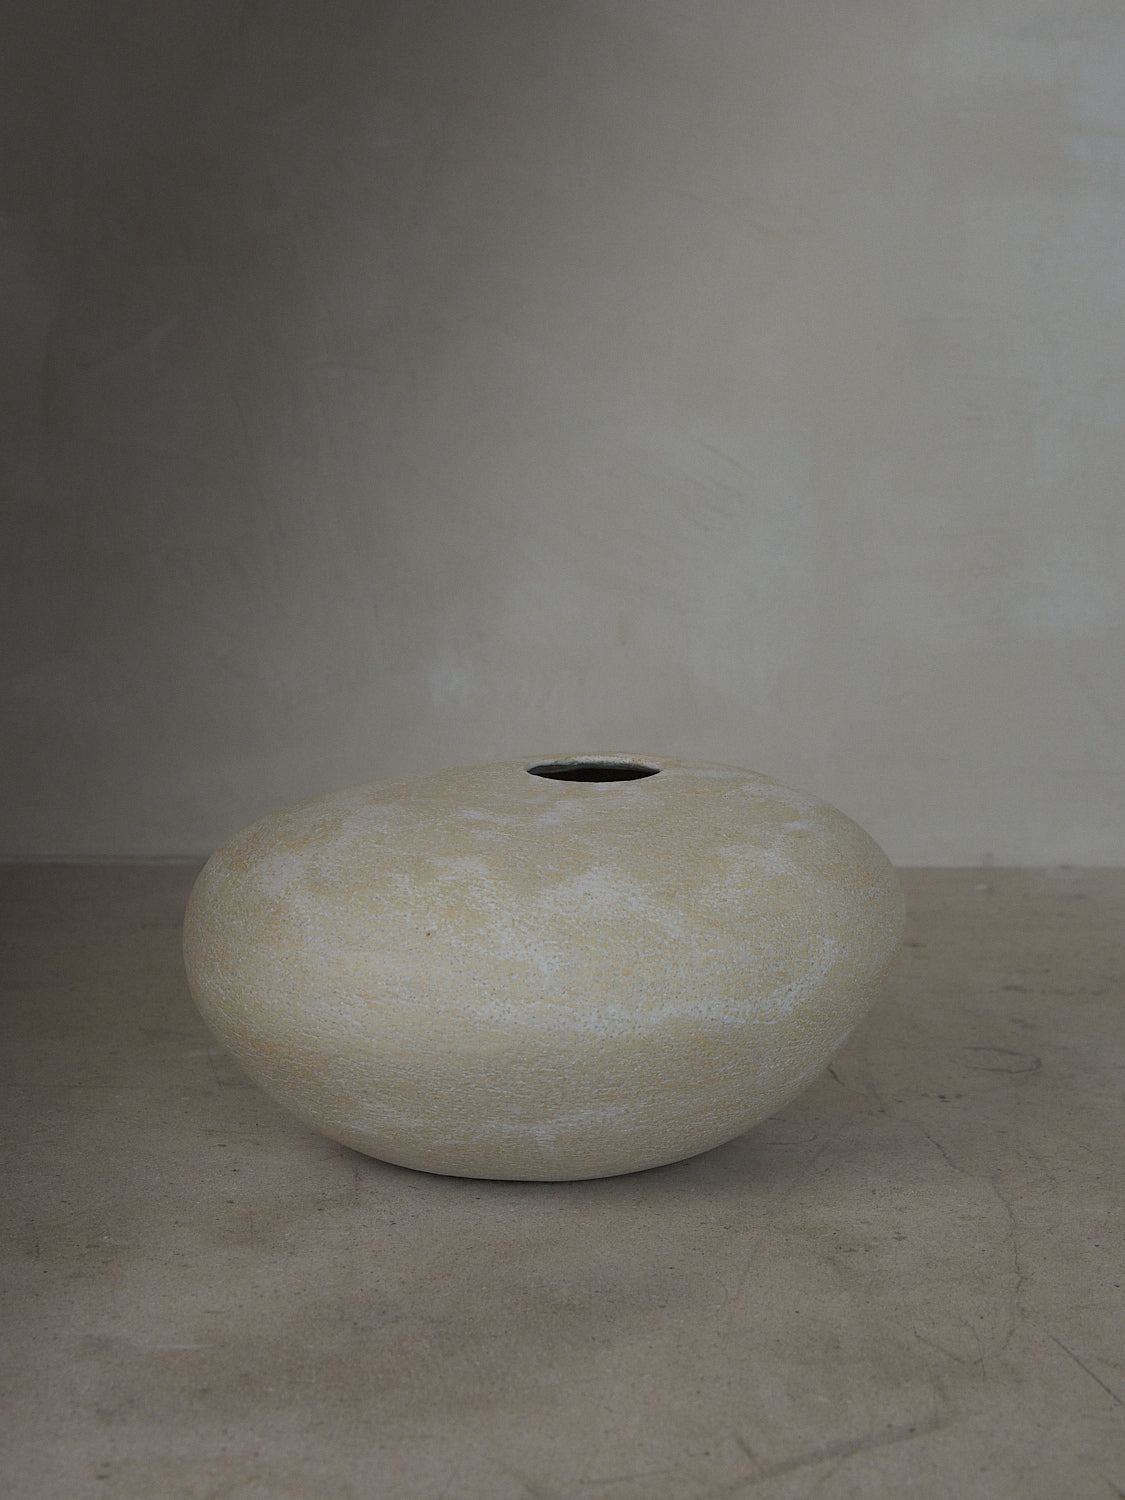 A statement vase inspired by aged river rocks with an irregular oblong shape in a matte stone finish.